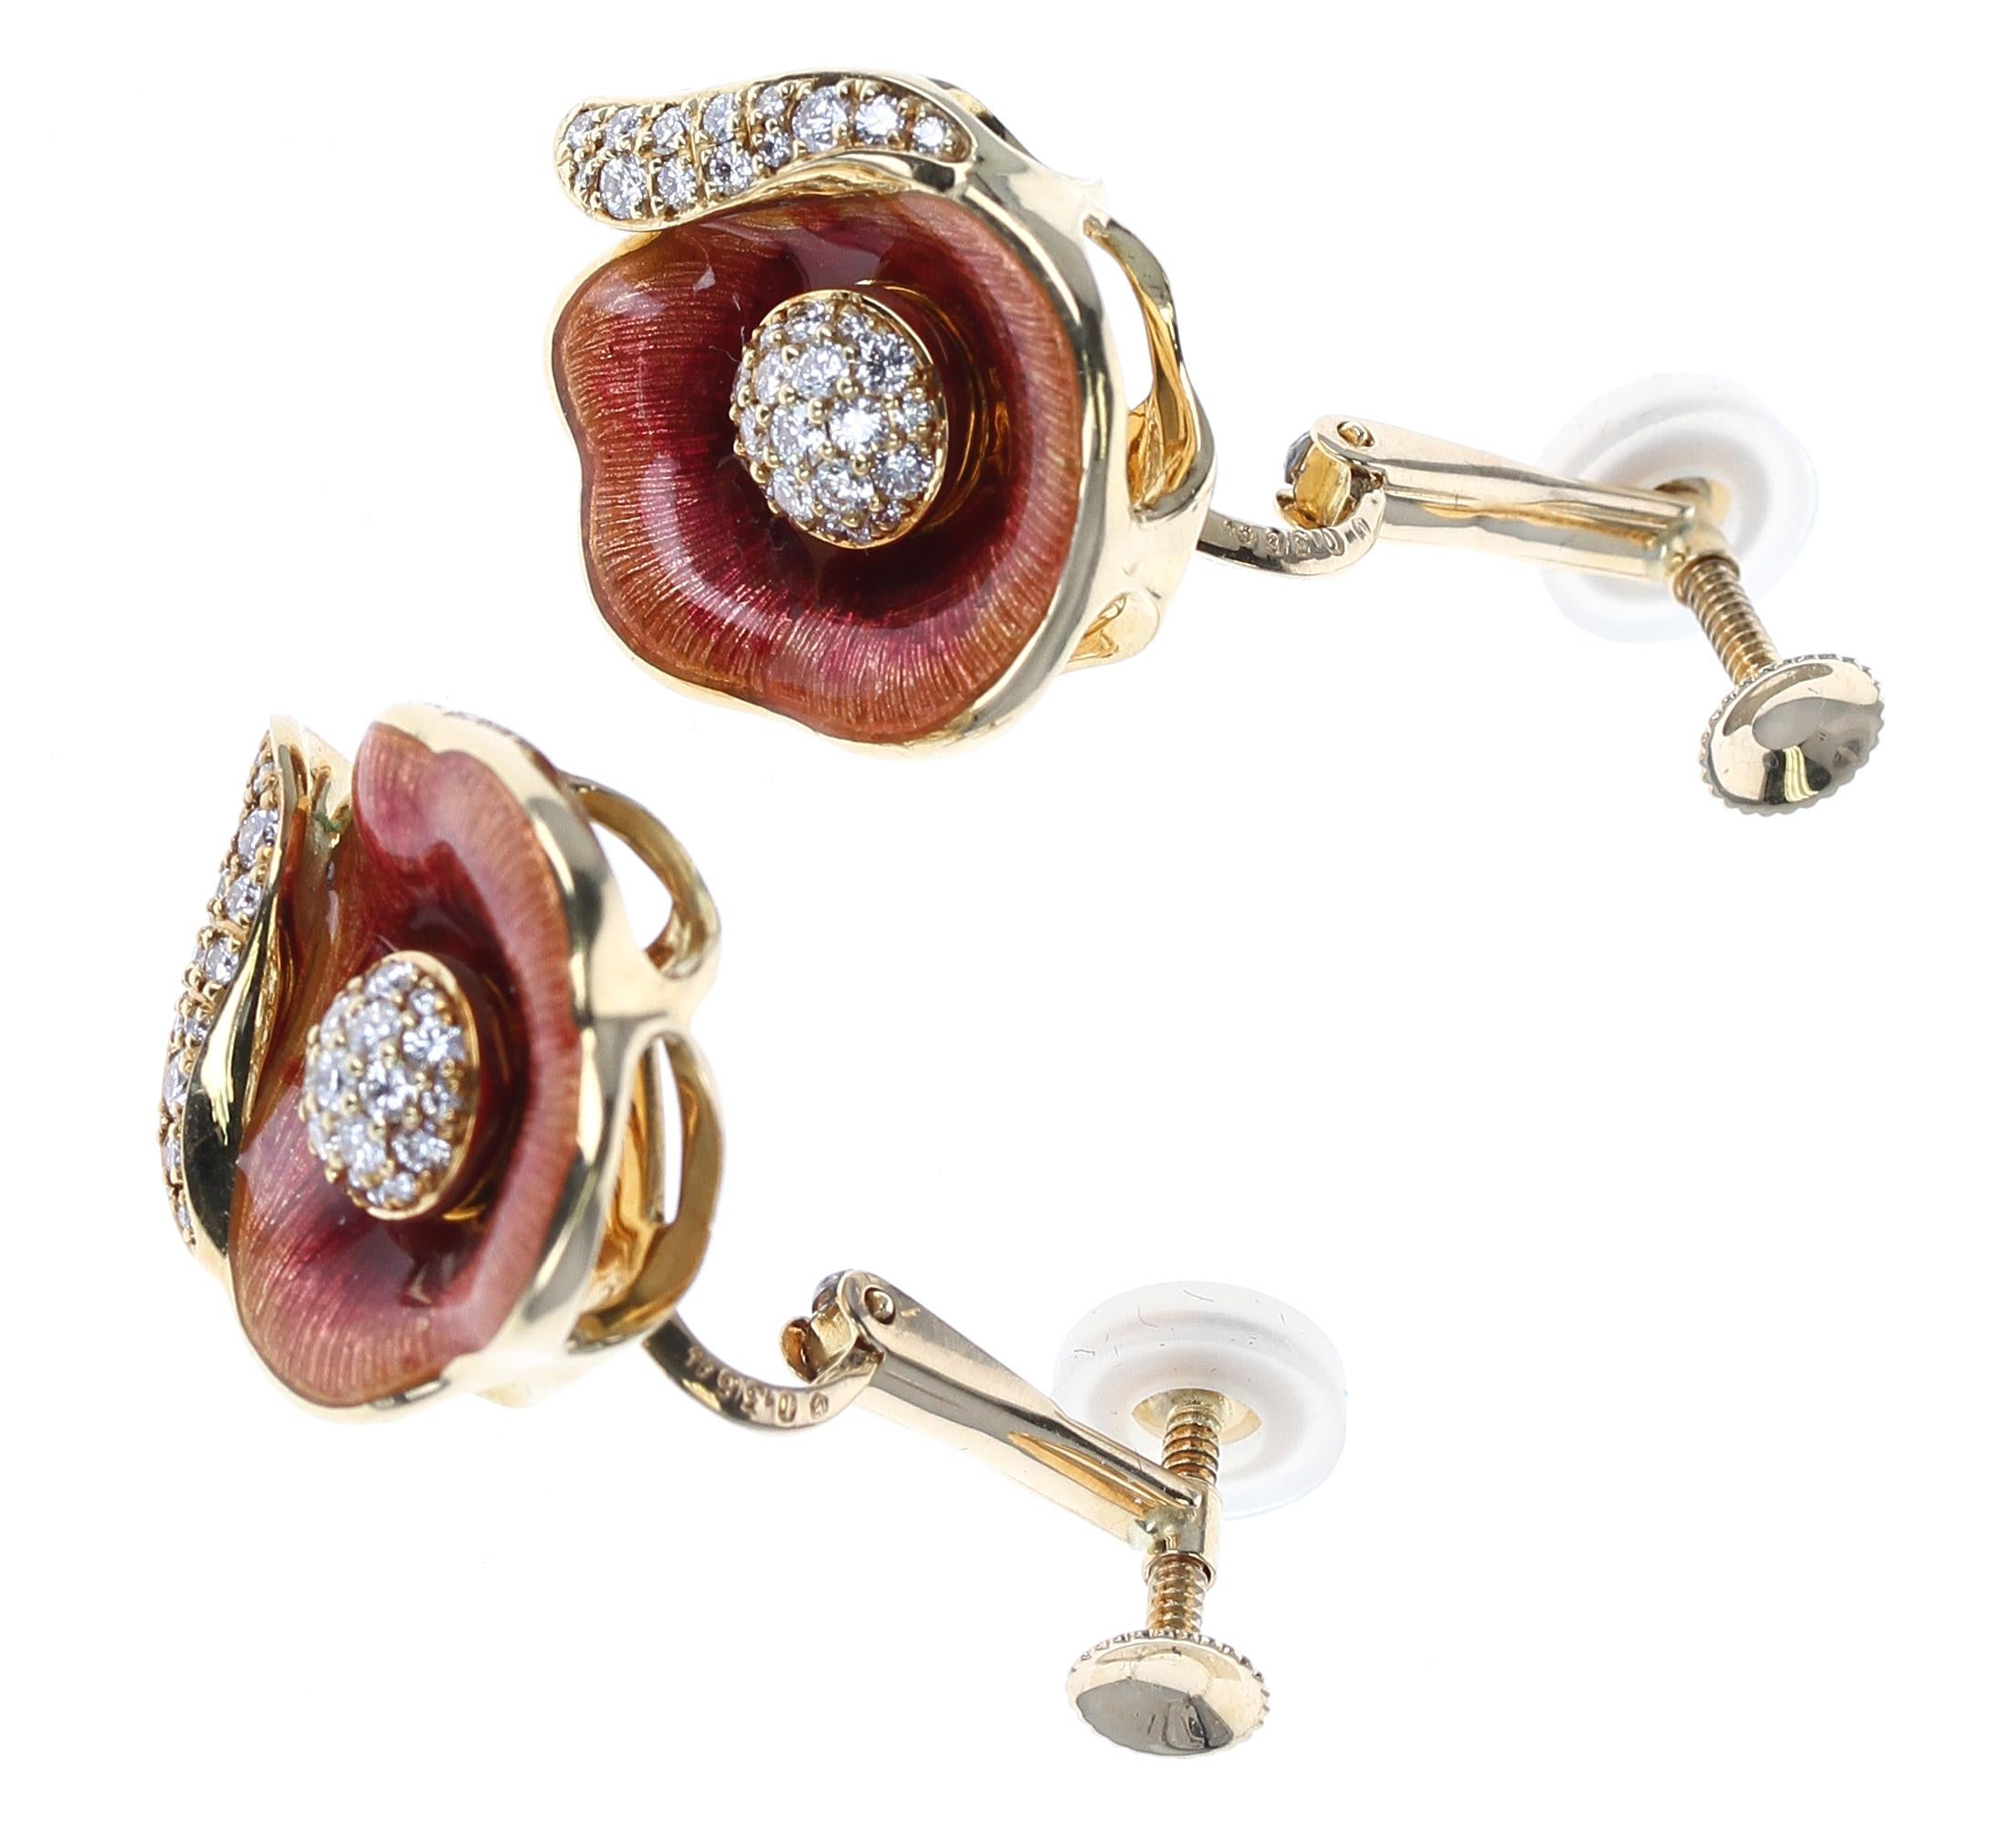 A beautiful pair of modern Fabergé Floral Orange Enamel and Diamond Earrings made in 18 Karat Yellow Gold. The enamel has a matte finish. Diamond Weight: 0.73 carats.
Total Weight: 18.98 grams.
